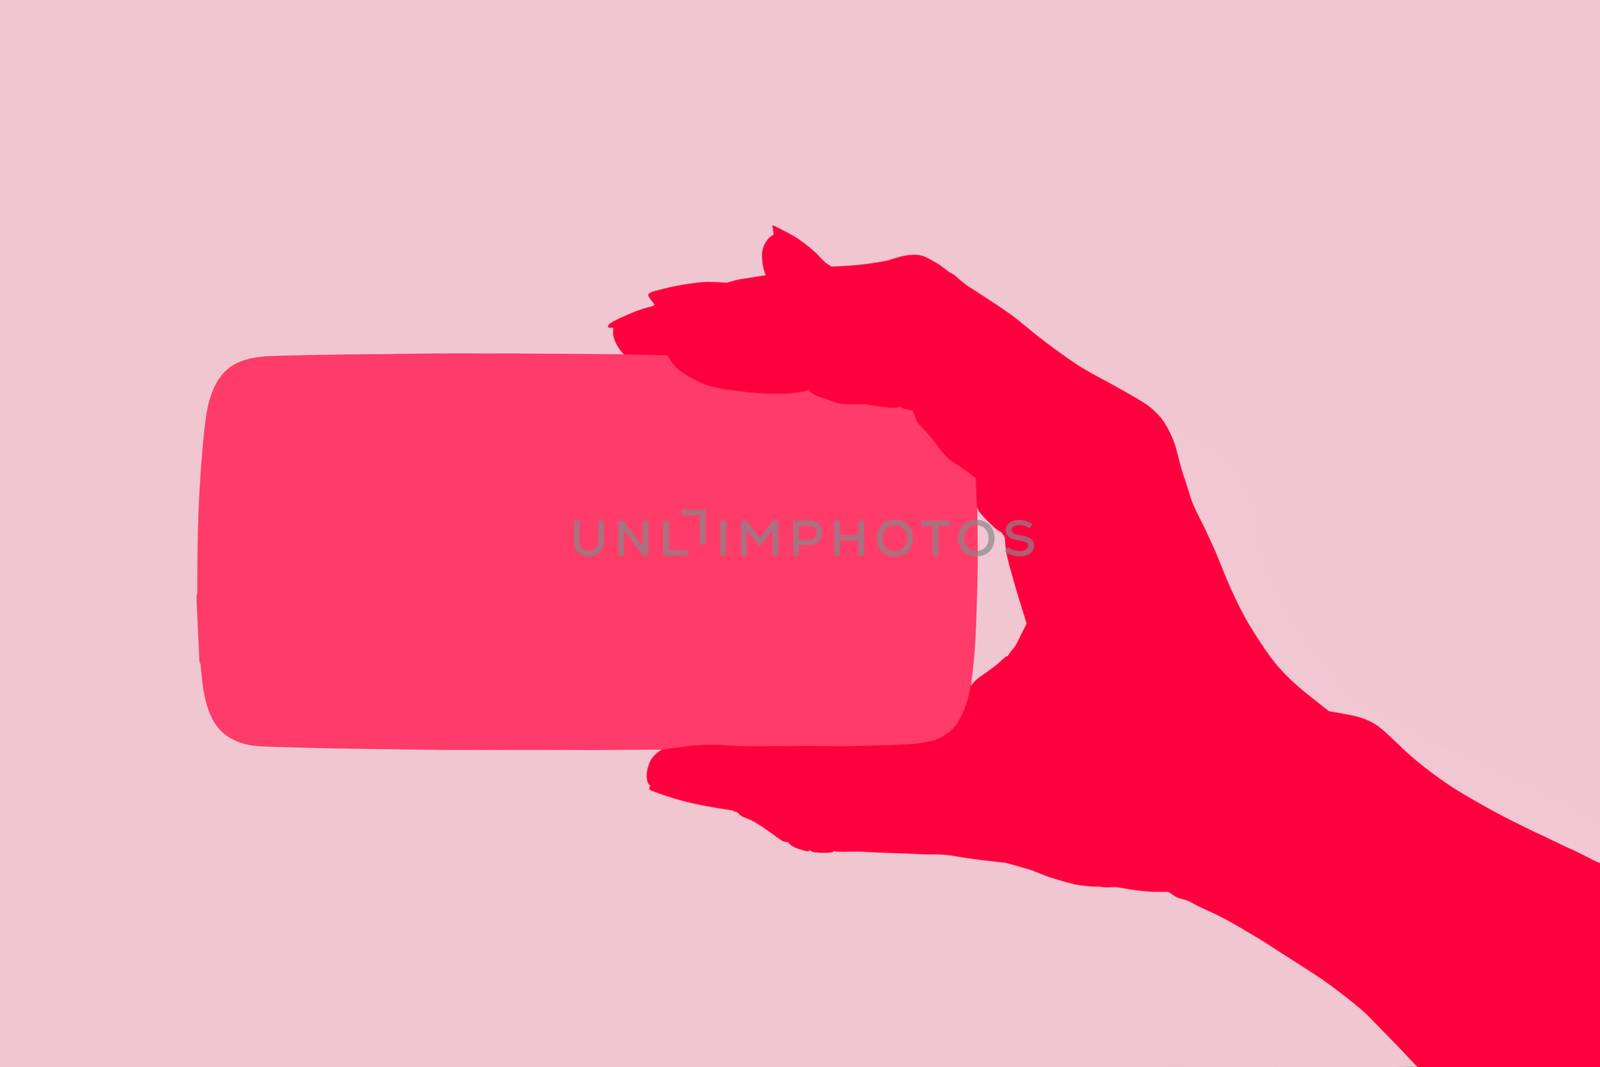 Smartphone. Female hand holding smartphone in hand. Illustration in pink. Woman and technology, feminine technology.